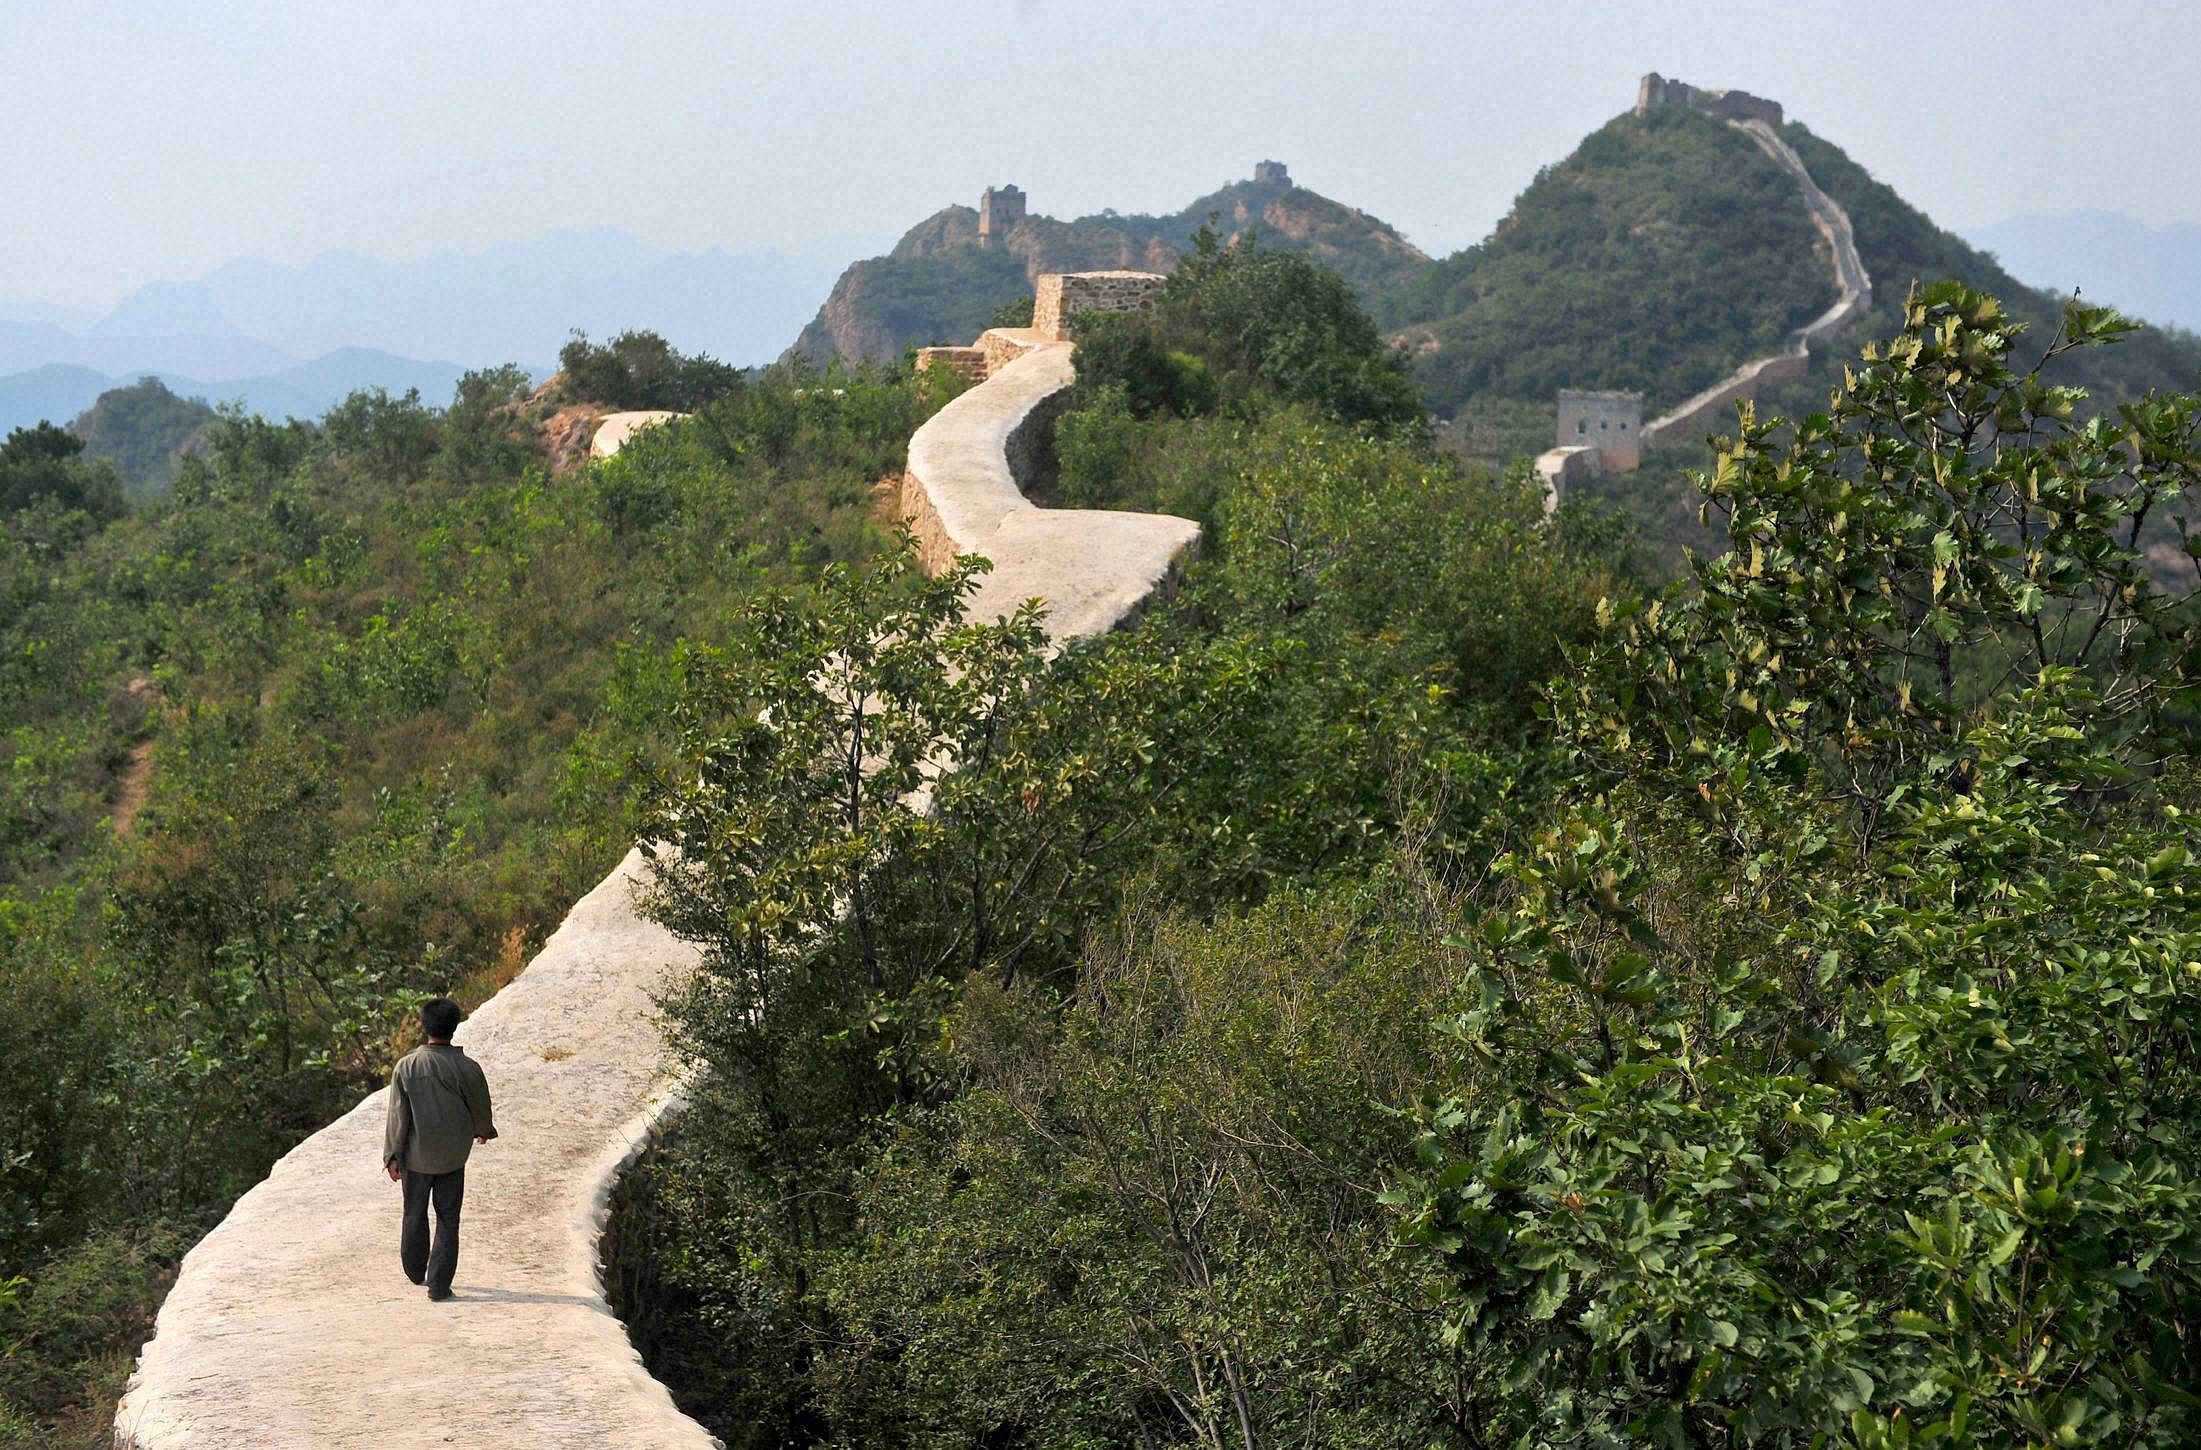 A villager walks across a restored section of the Great Wall in Suizhong County in northeastern China's Liaoning Province. AP/PTI Photo